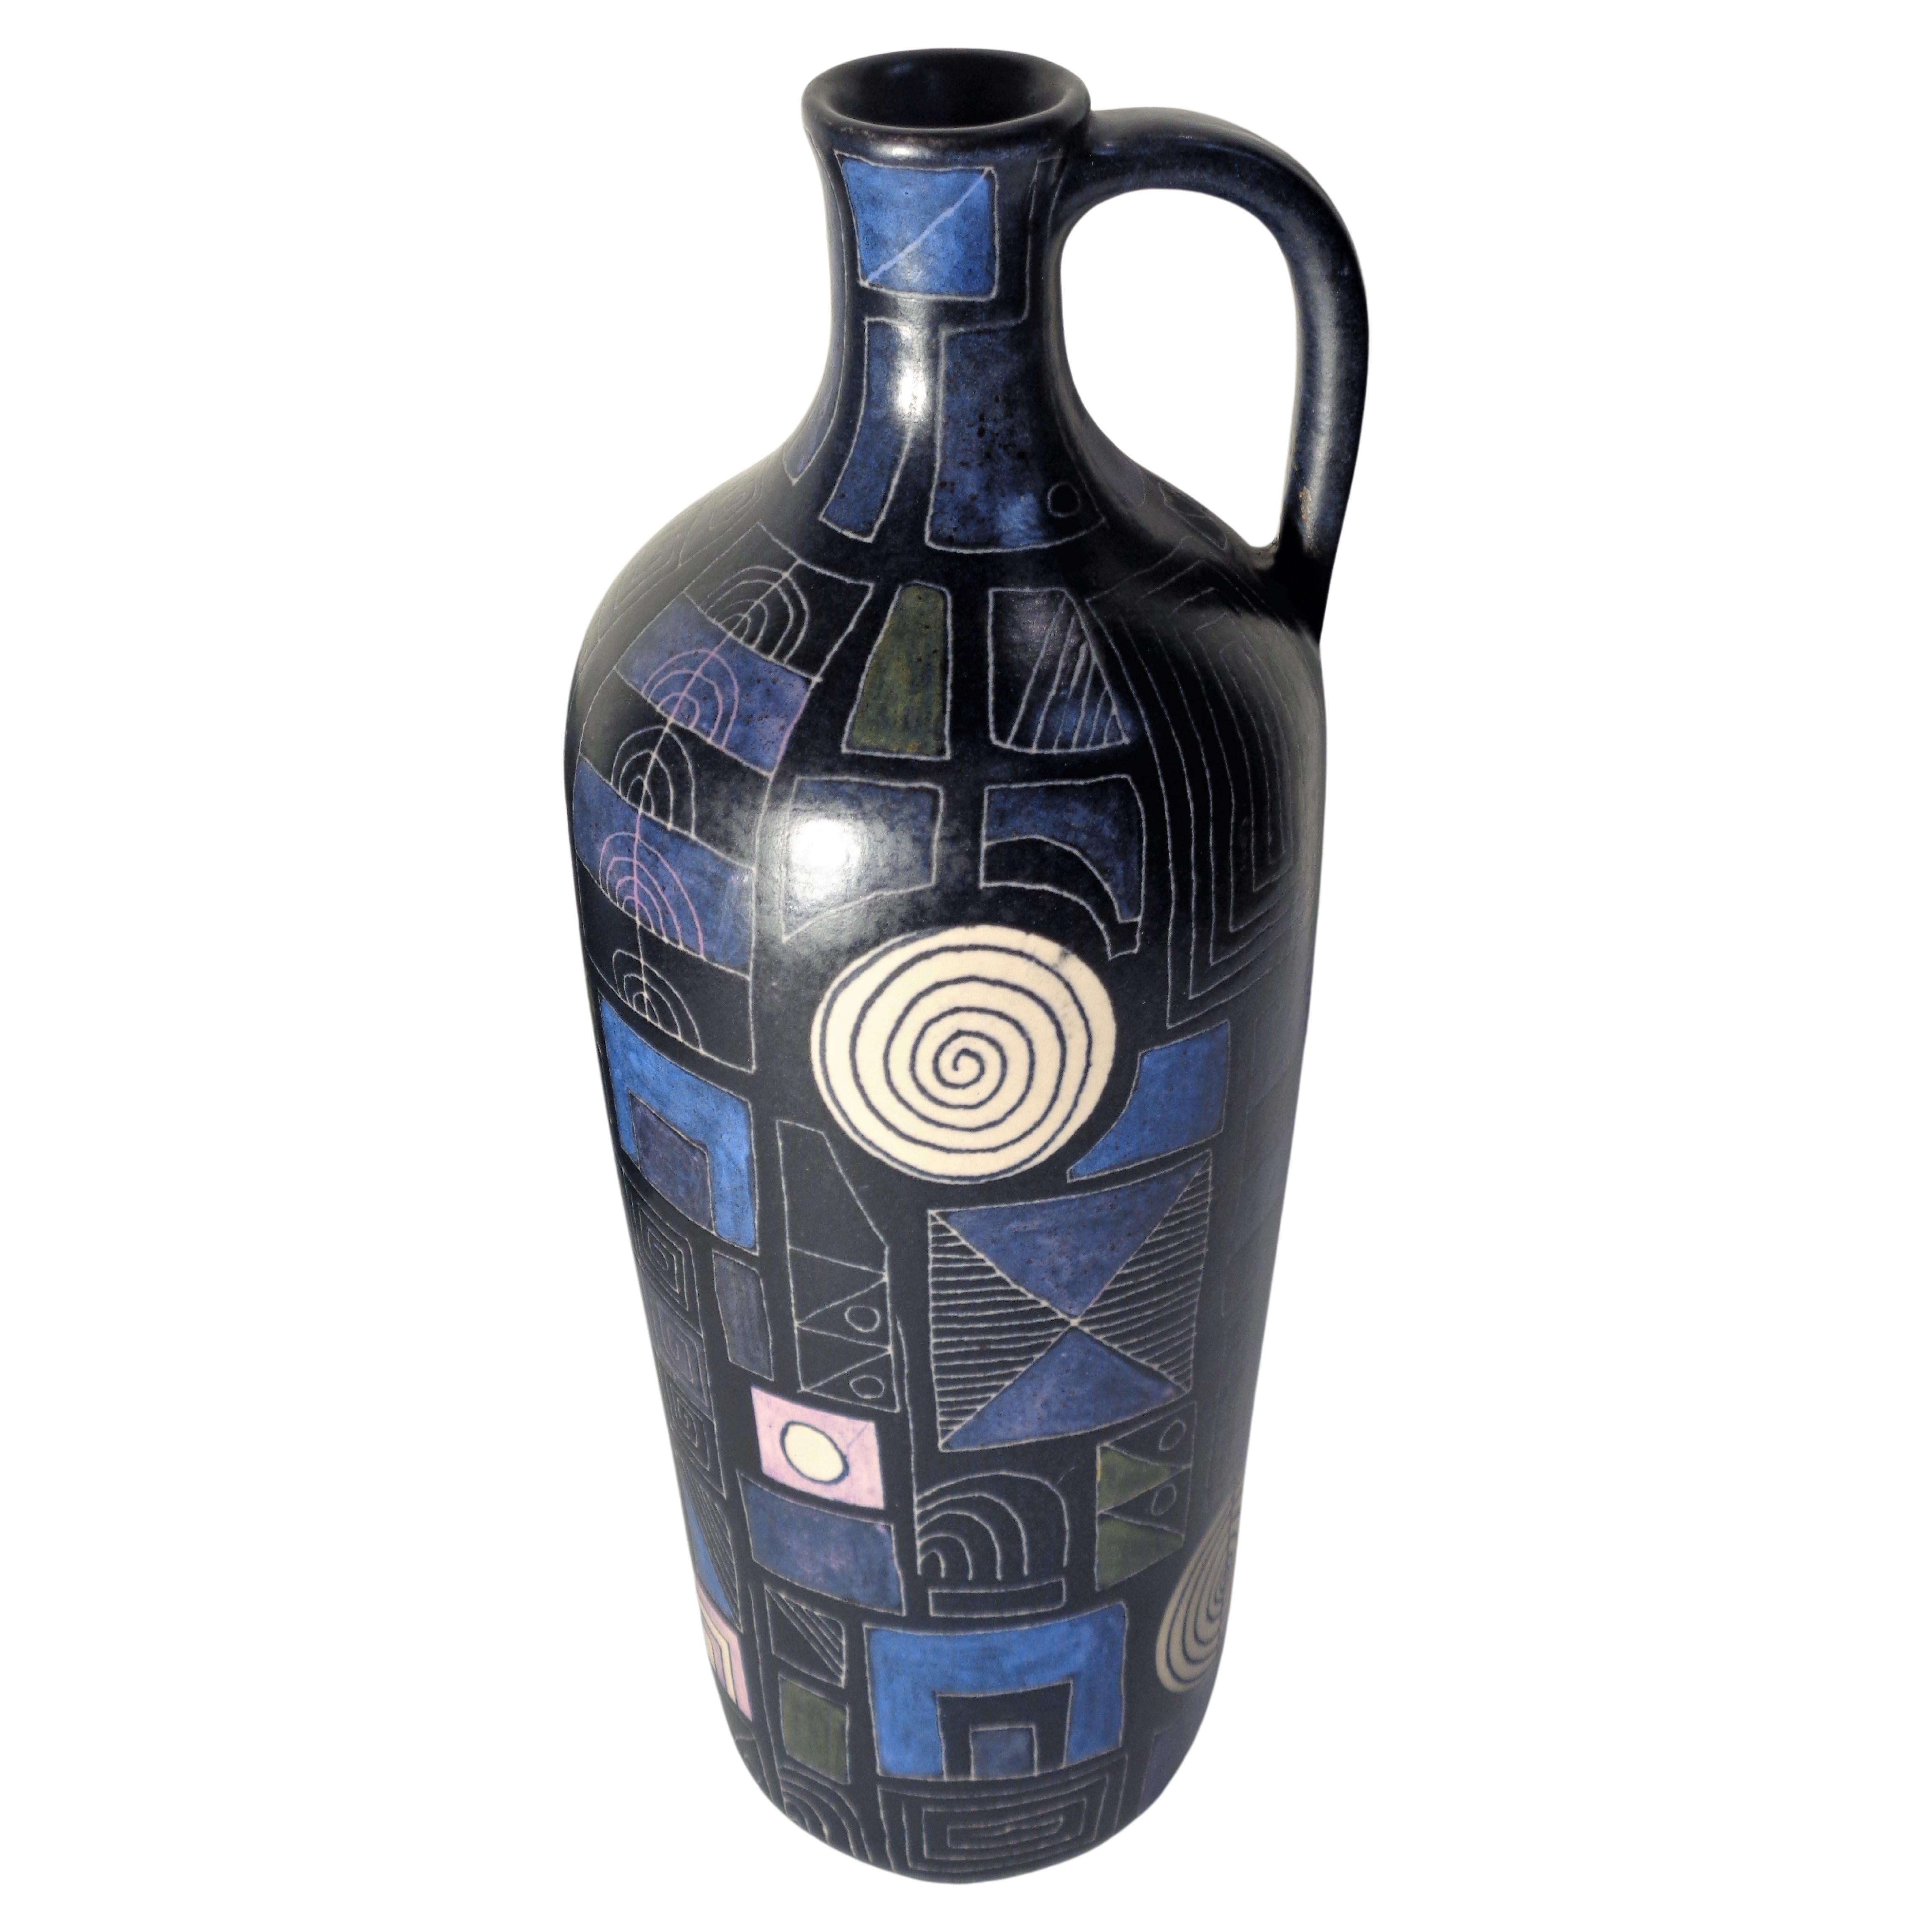 20th Century  Lu Klopfer Geometric Sgrafitto Pottery Collection, Germany 1950's